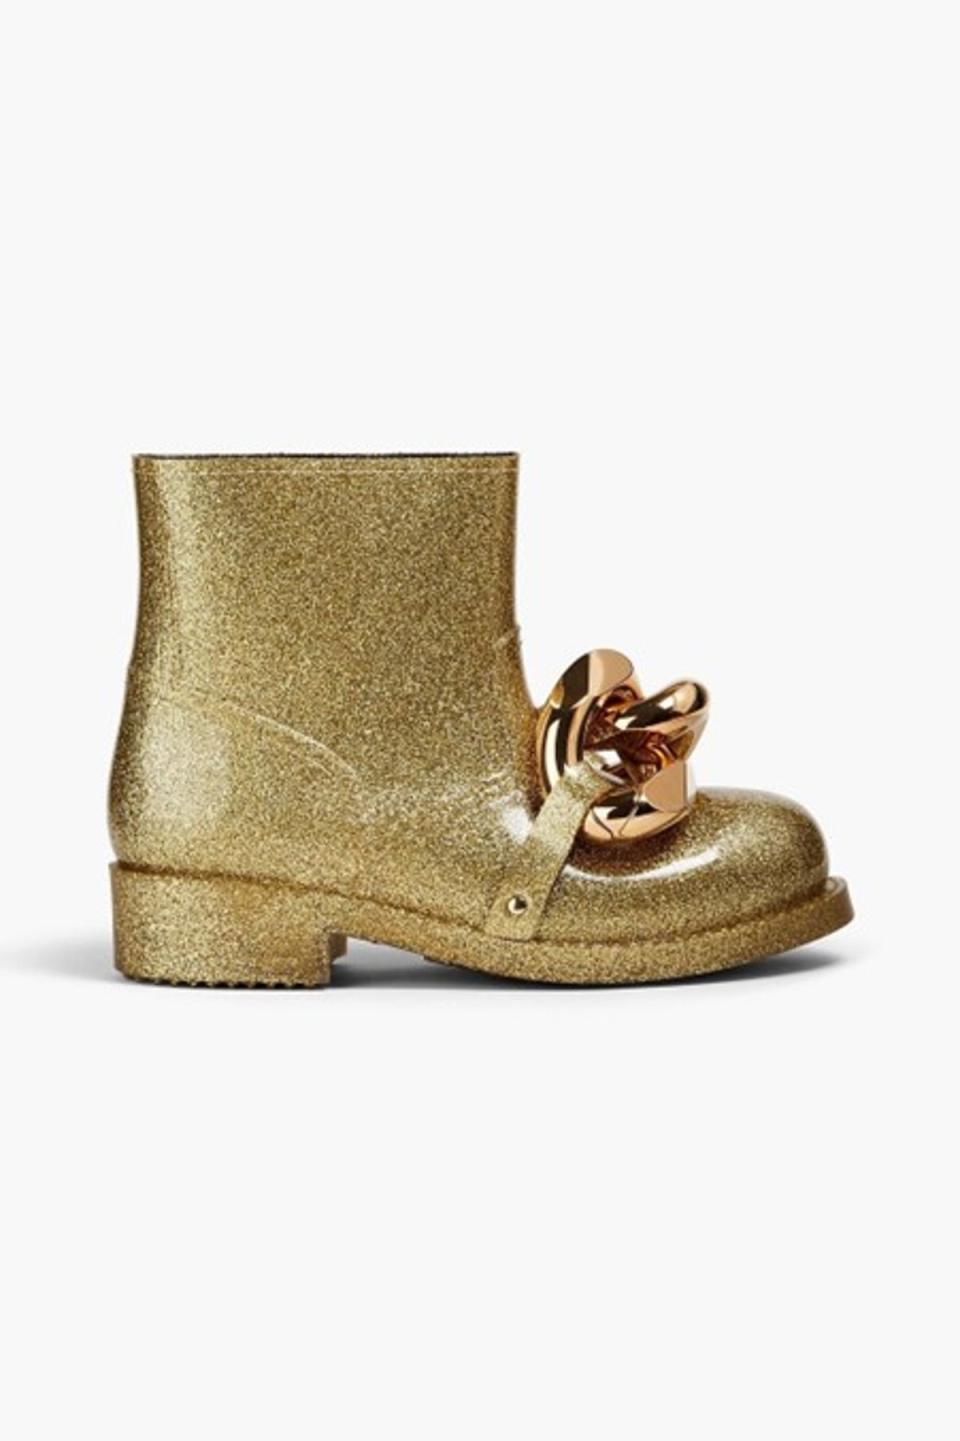  (JW ANDERSON Glittered chain-embellished rubber rain boots)